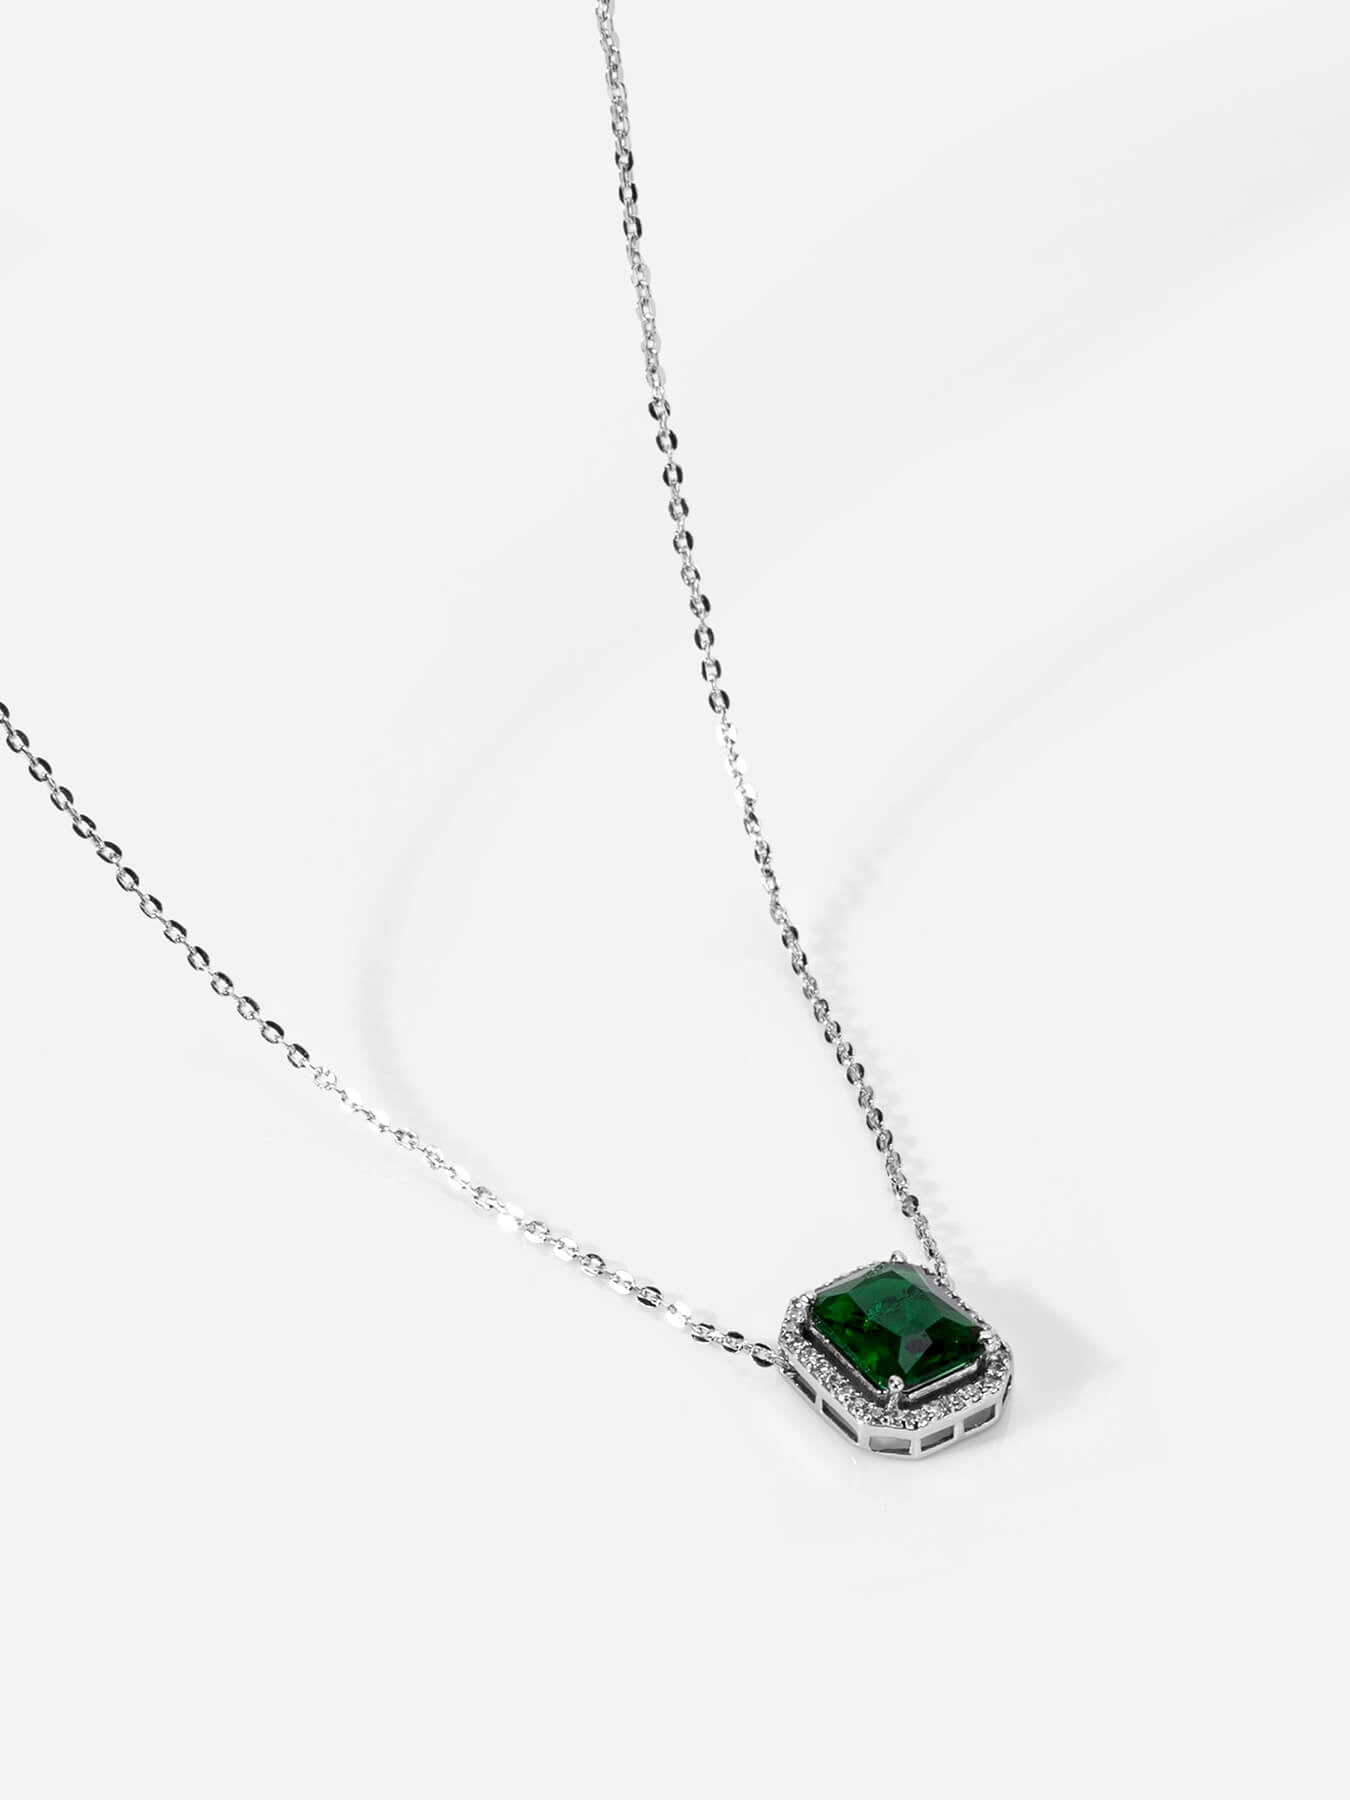 Green Zircon Sterling Silver Necklace